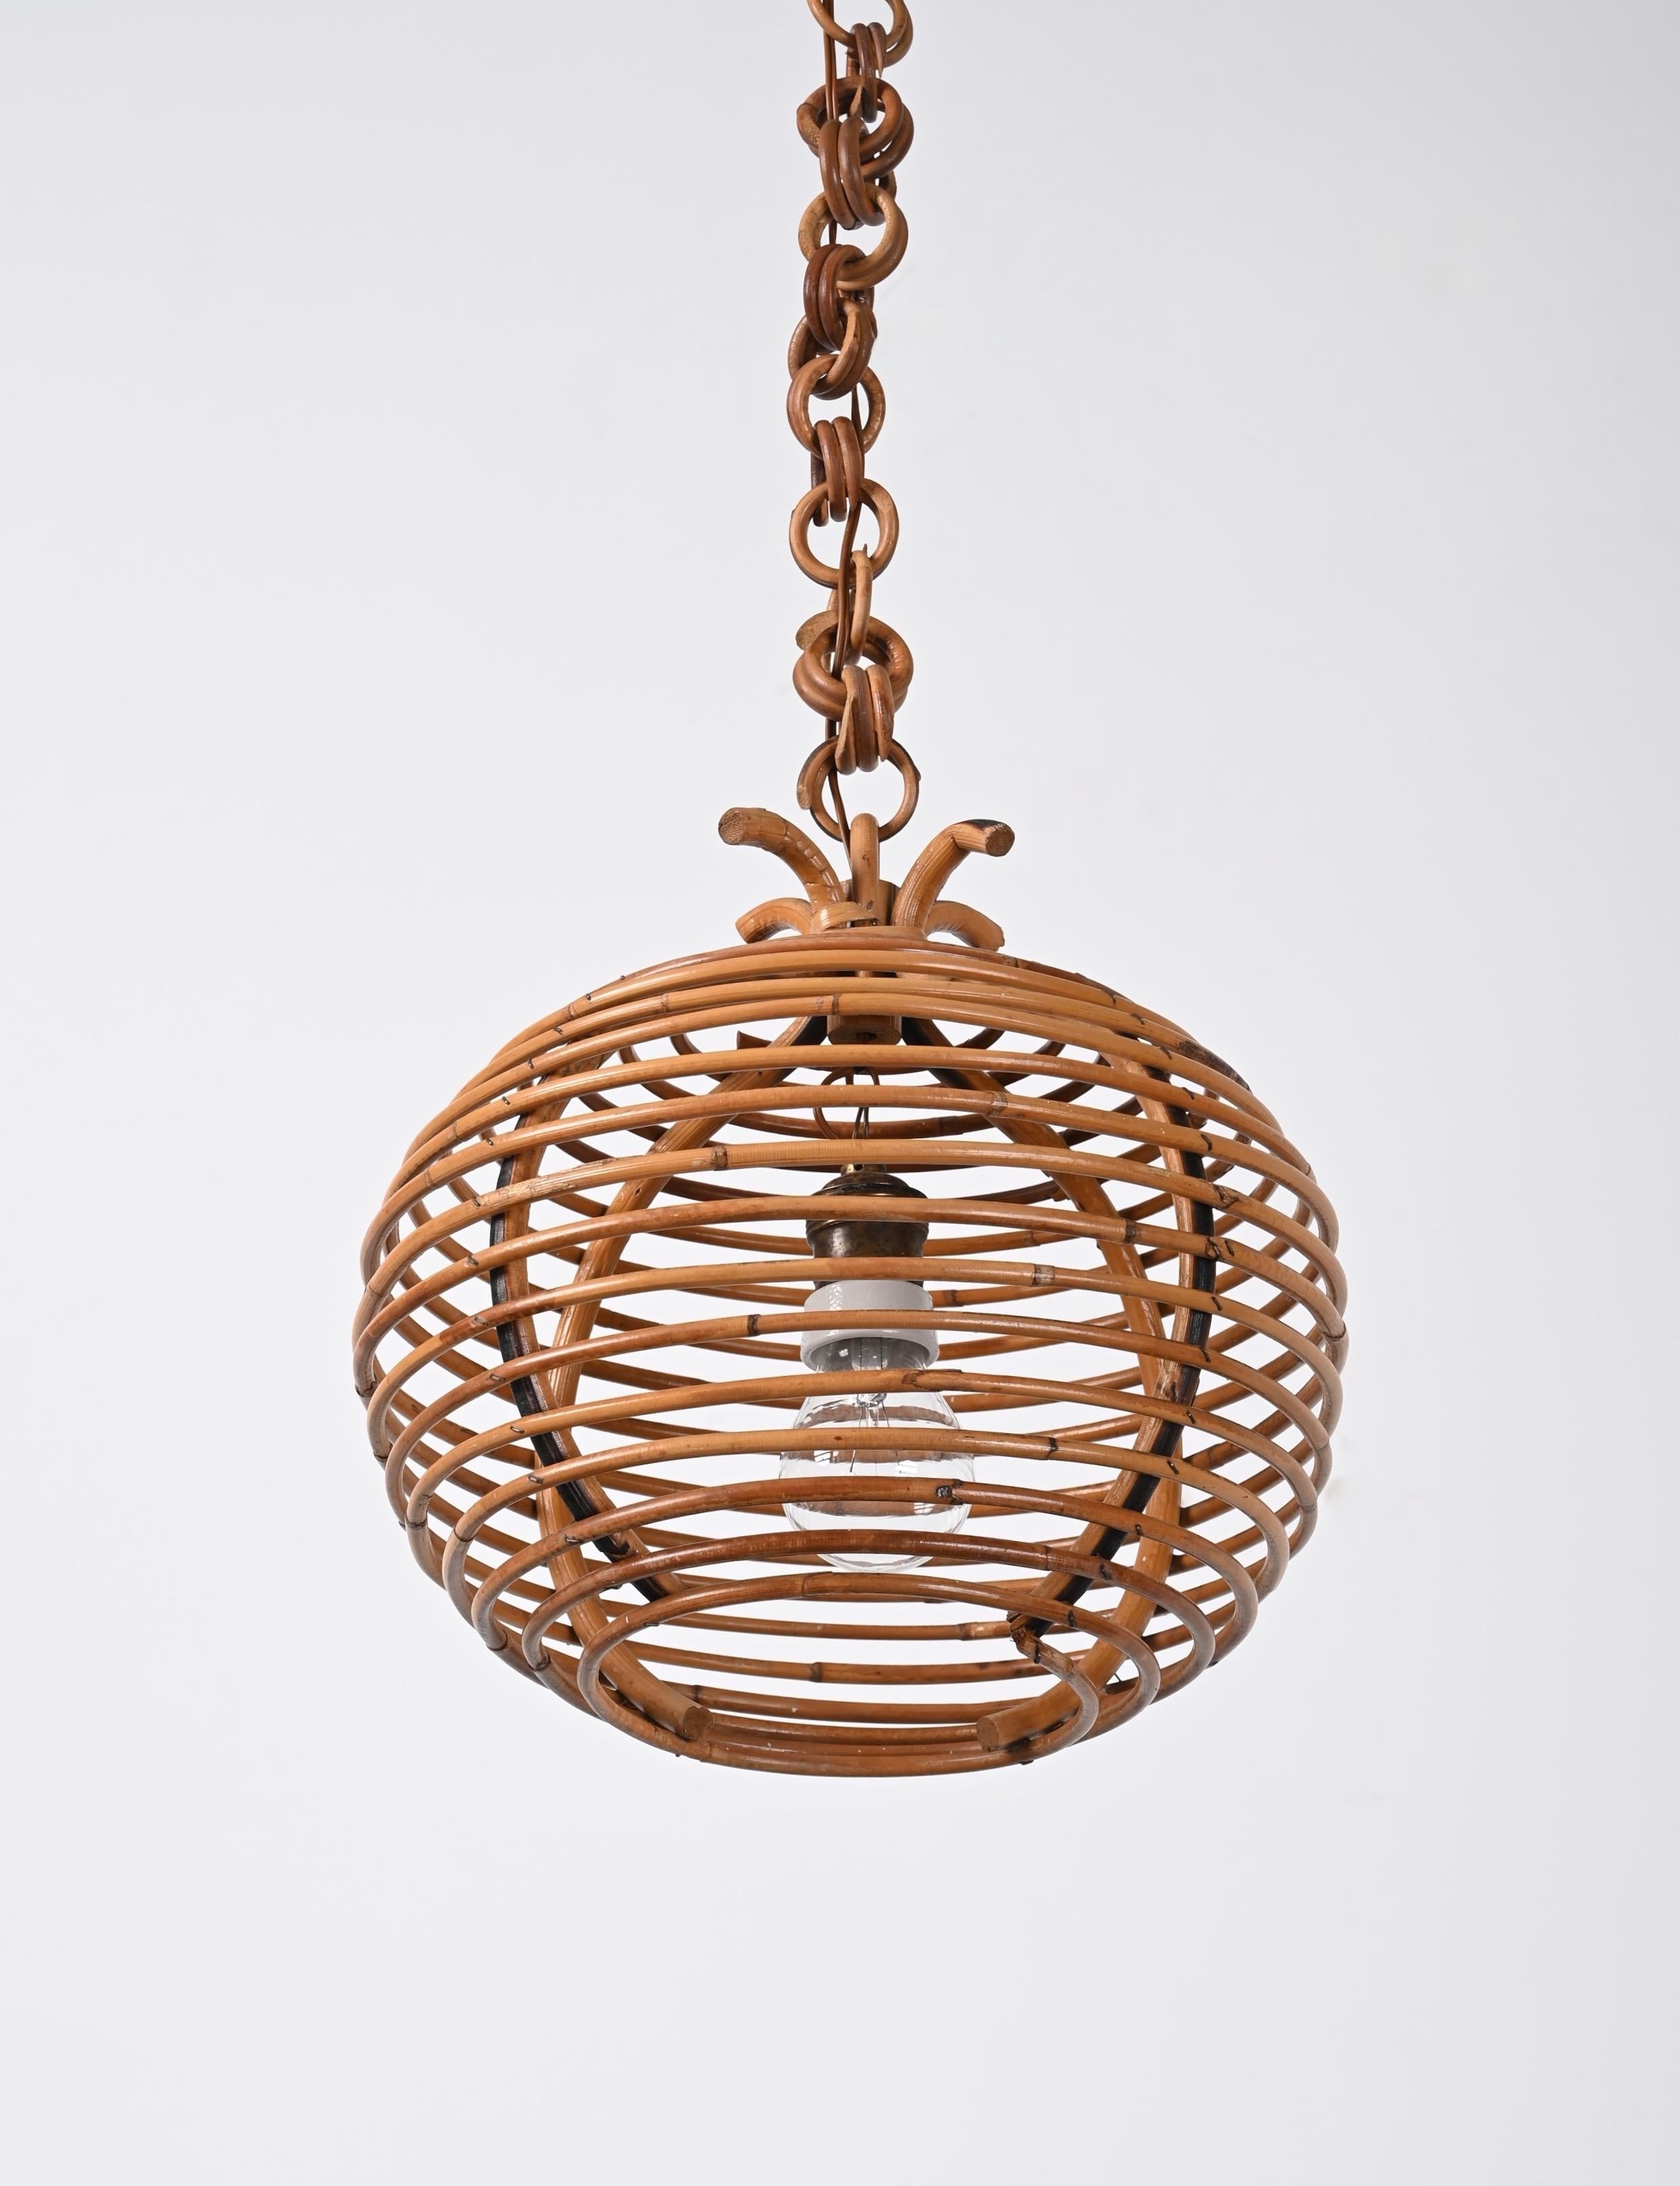 Bamboo Midcentury French Riviera Bambo and Rattan Spherical Italian Chandelier, 1960s For Sale